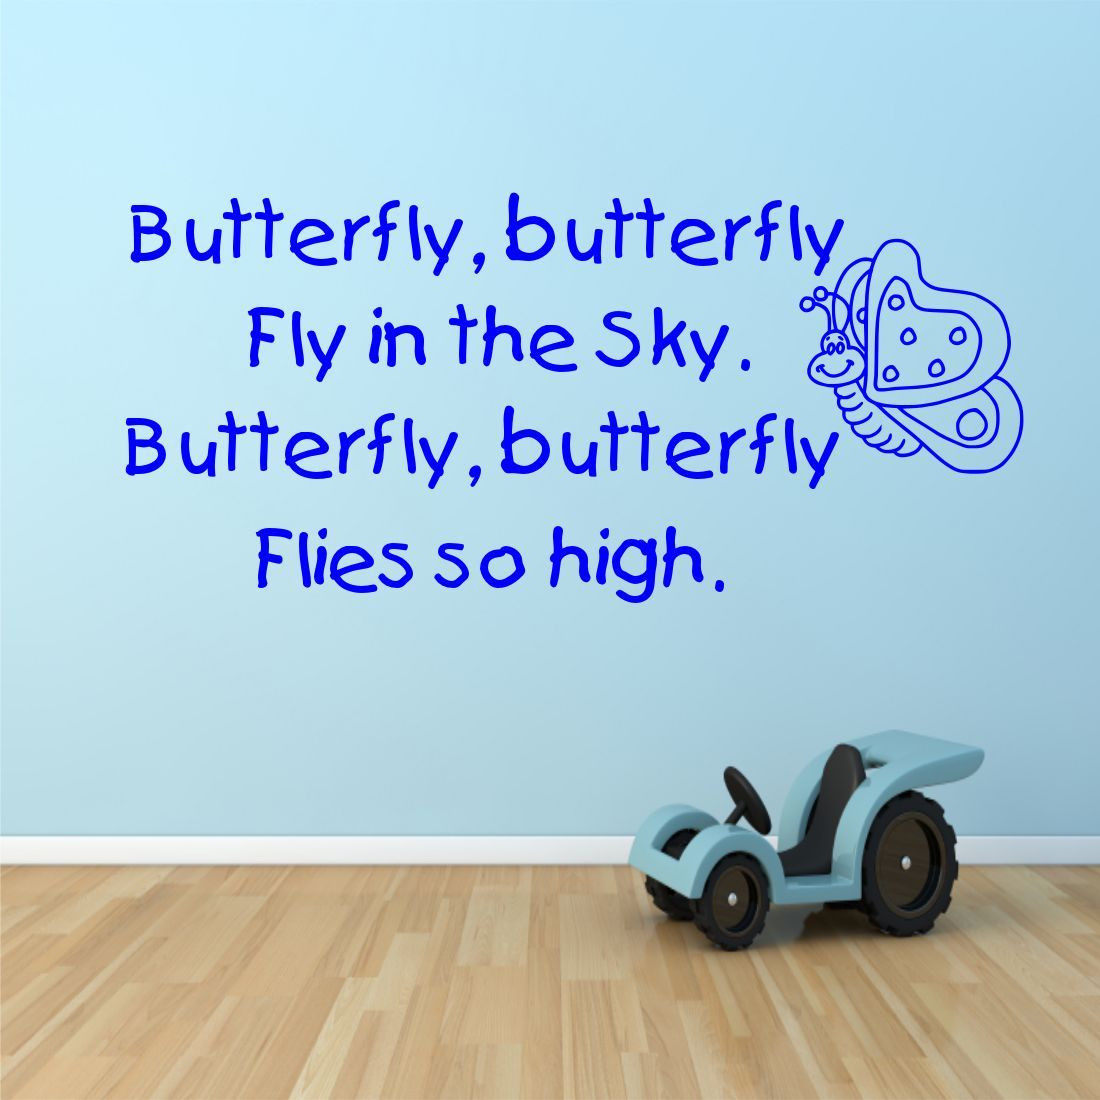 Butterfly Quotes For Kids
 KID S BUTTERFLY POEM CHILD S WALL ART QUOTE STICKER DECAL